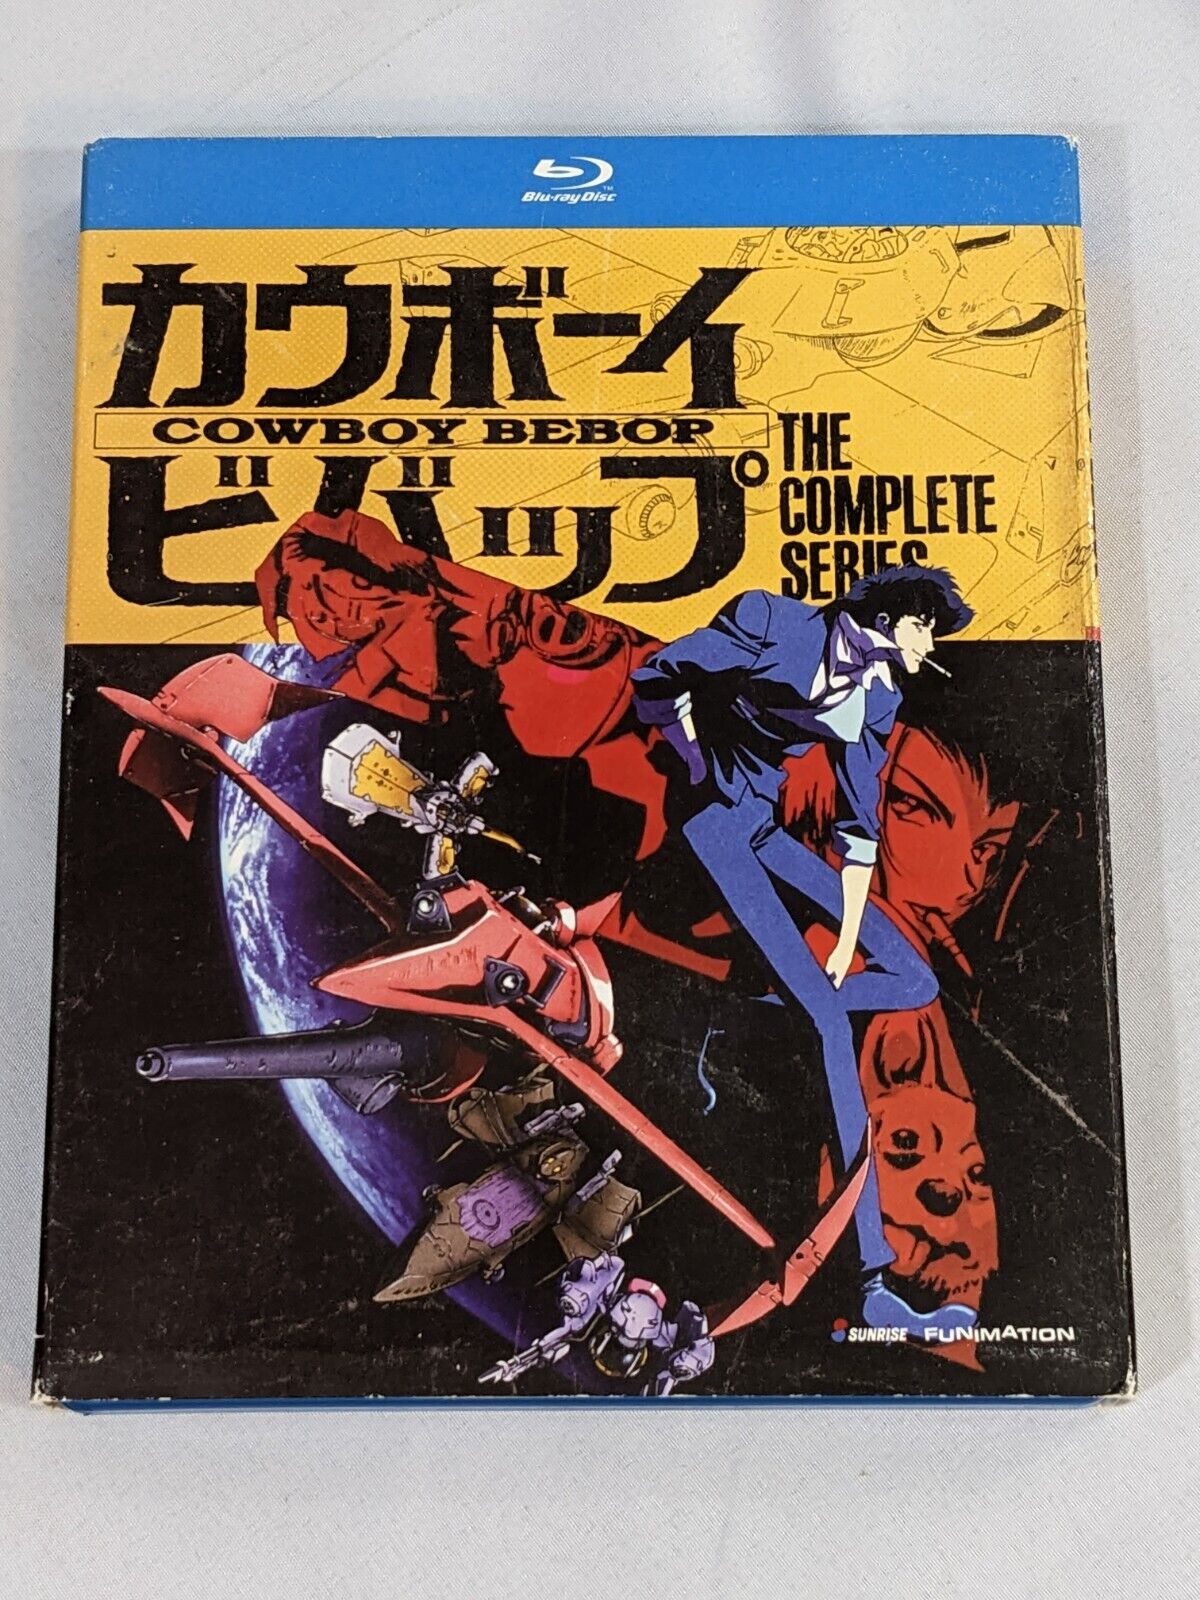 Cowboy BeBop The Complete Series 26 Episodes + Extras on 4 Blu-Ray Discs Anime